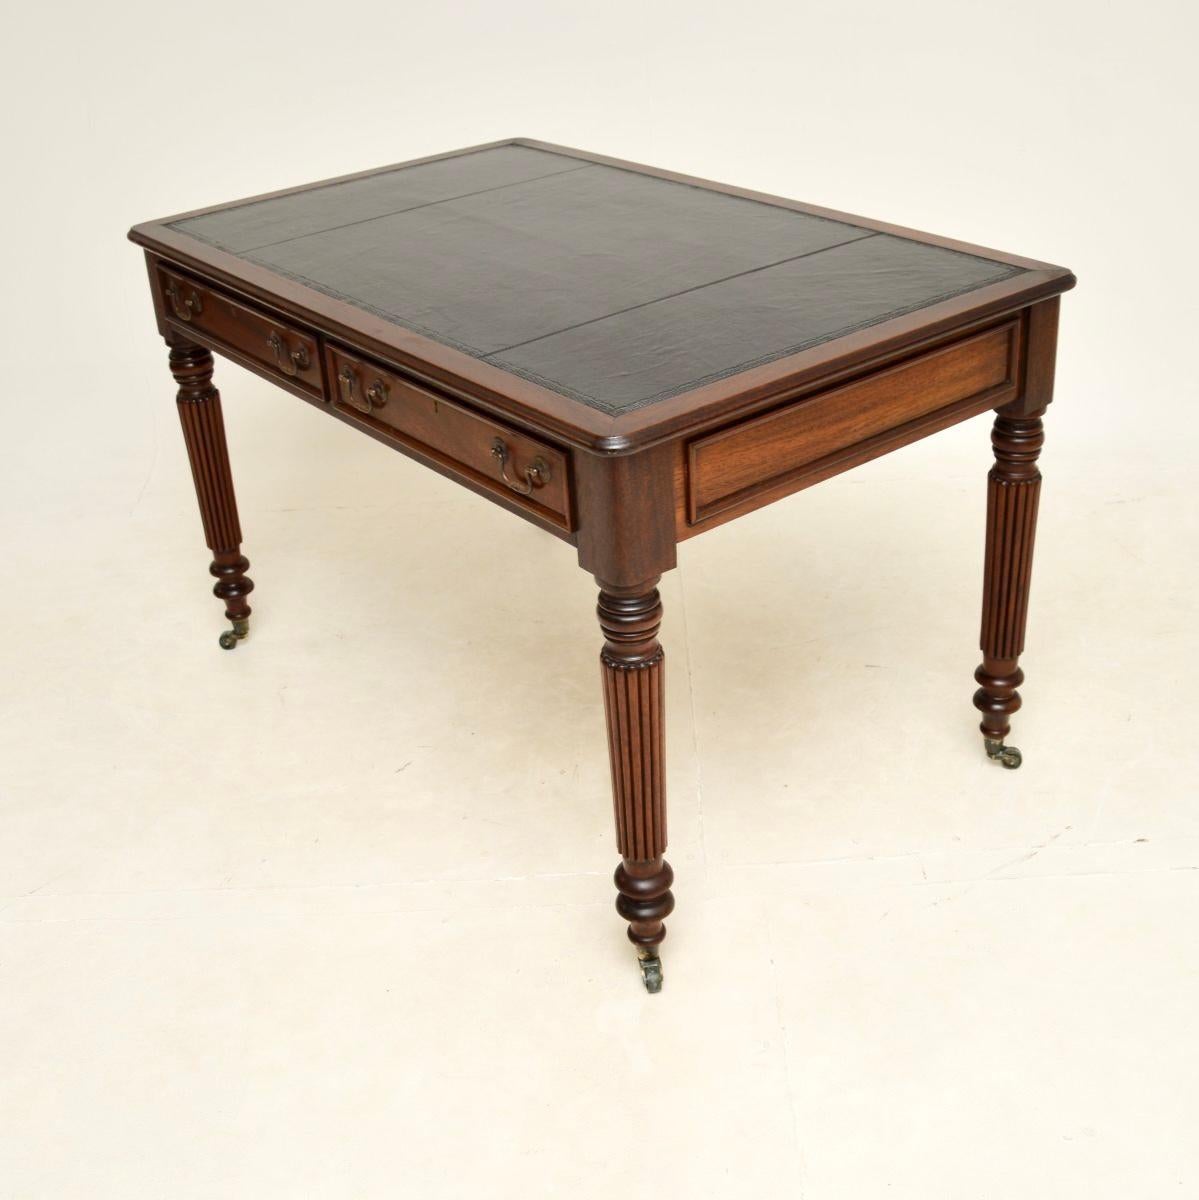 British Antique Leather Top Writing Table / Desk